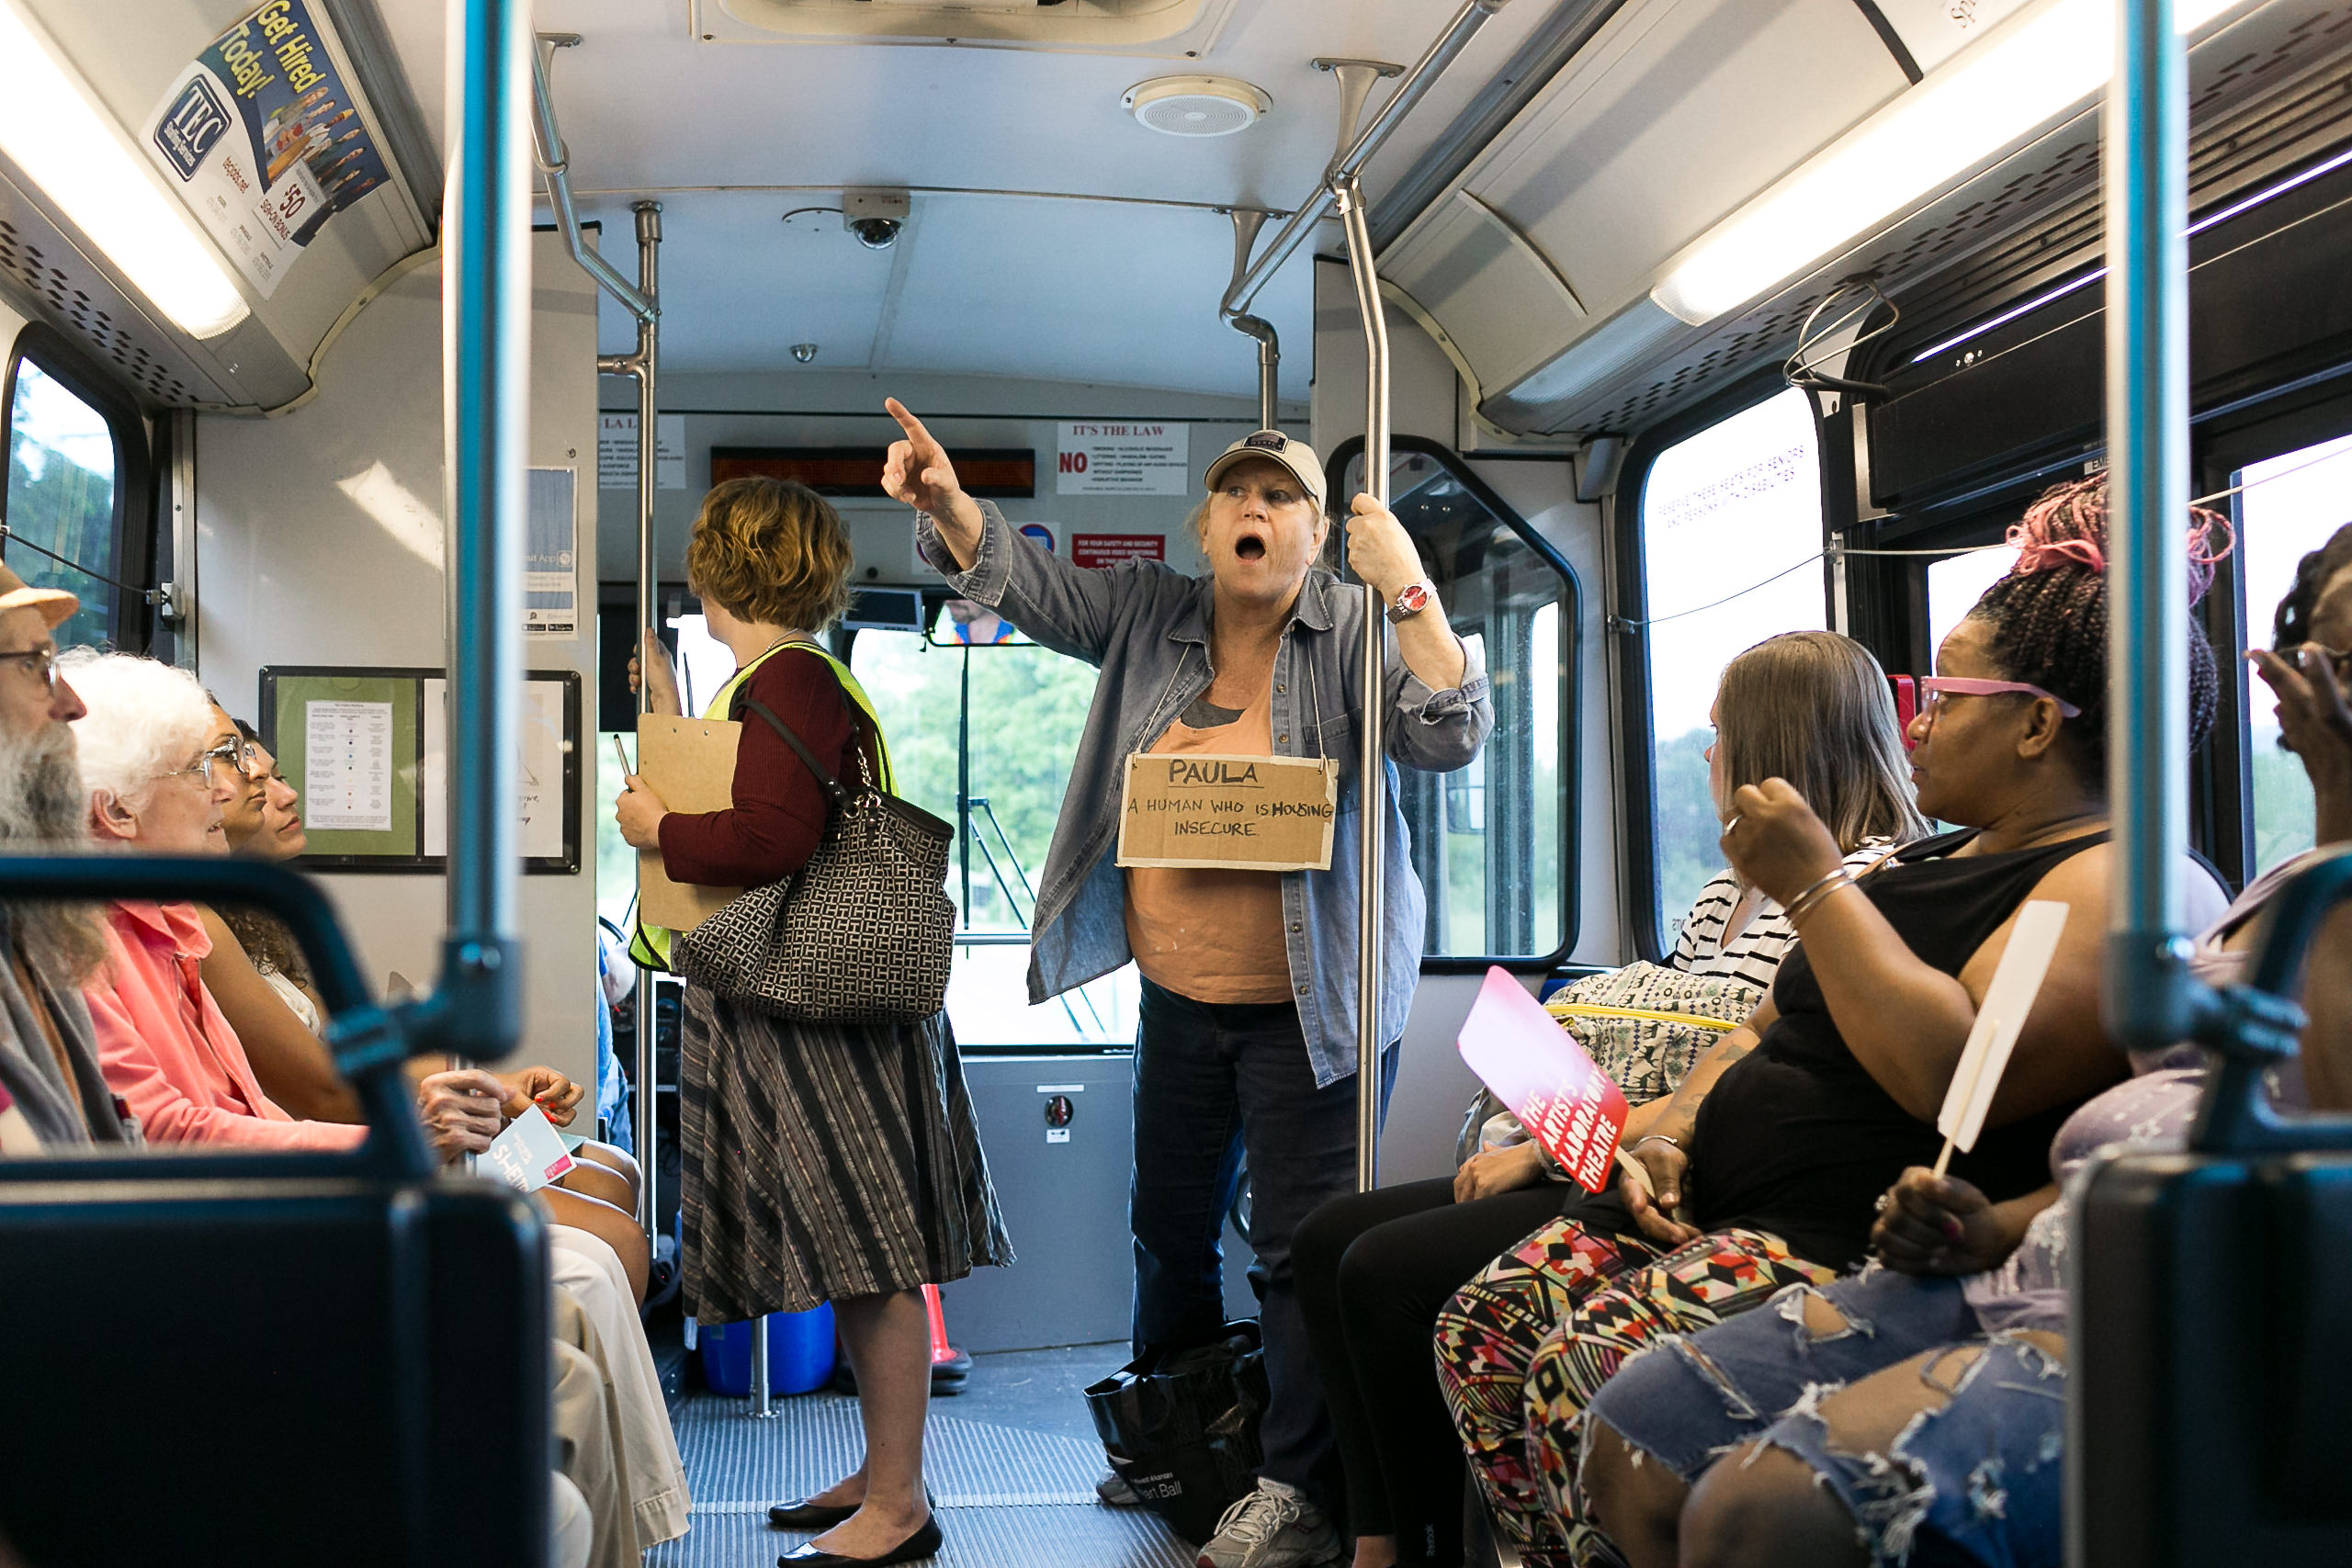 A woman, wearing a sign, stands and points a finger inside a bus.